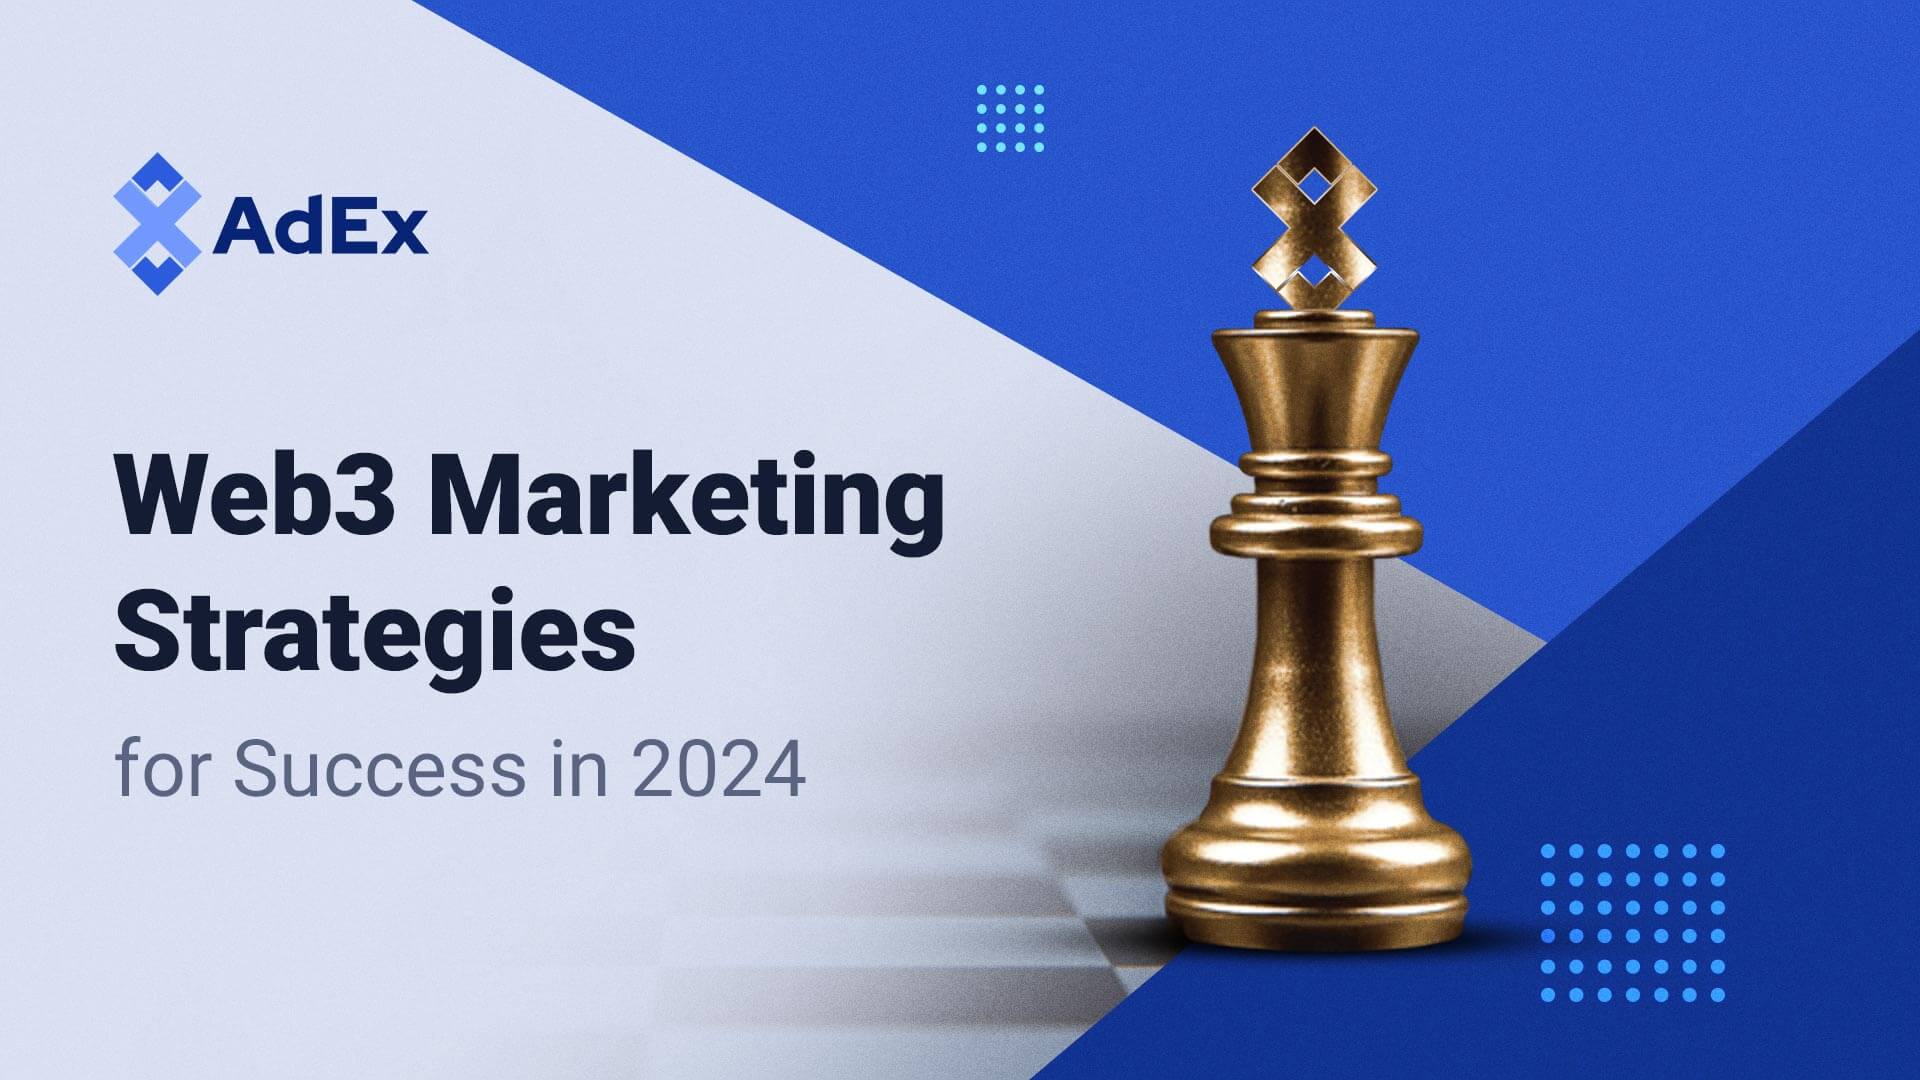 11 Web3 Marketing Strategies for Success in 2024 | AdEx Blog